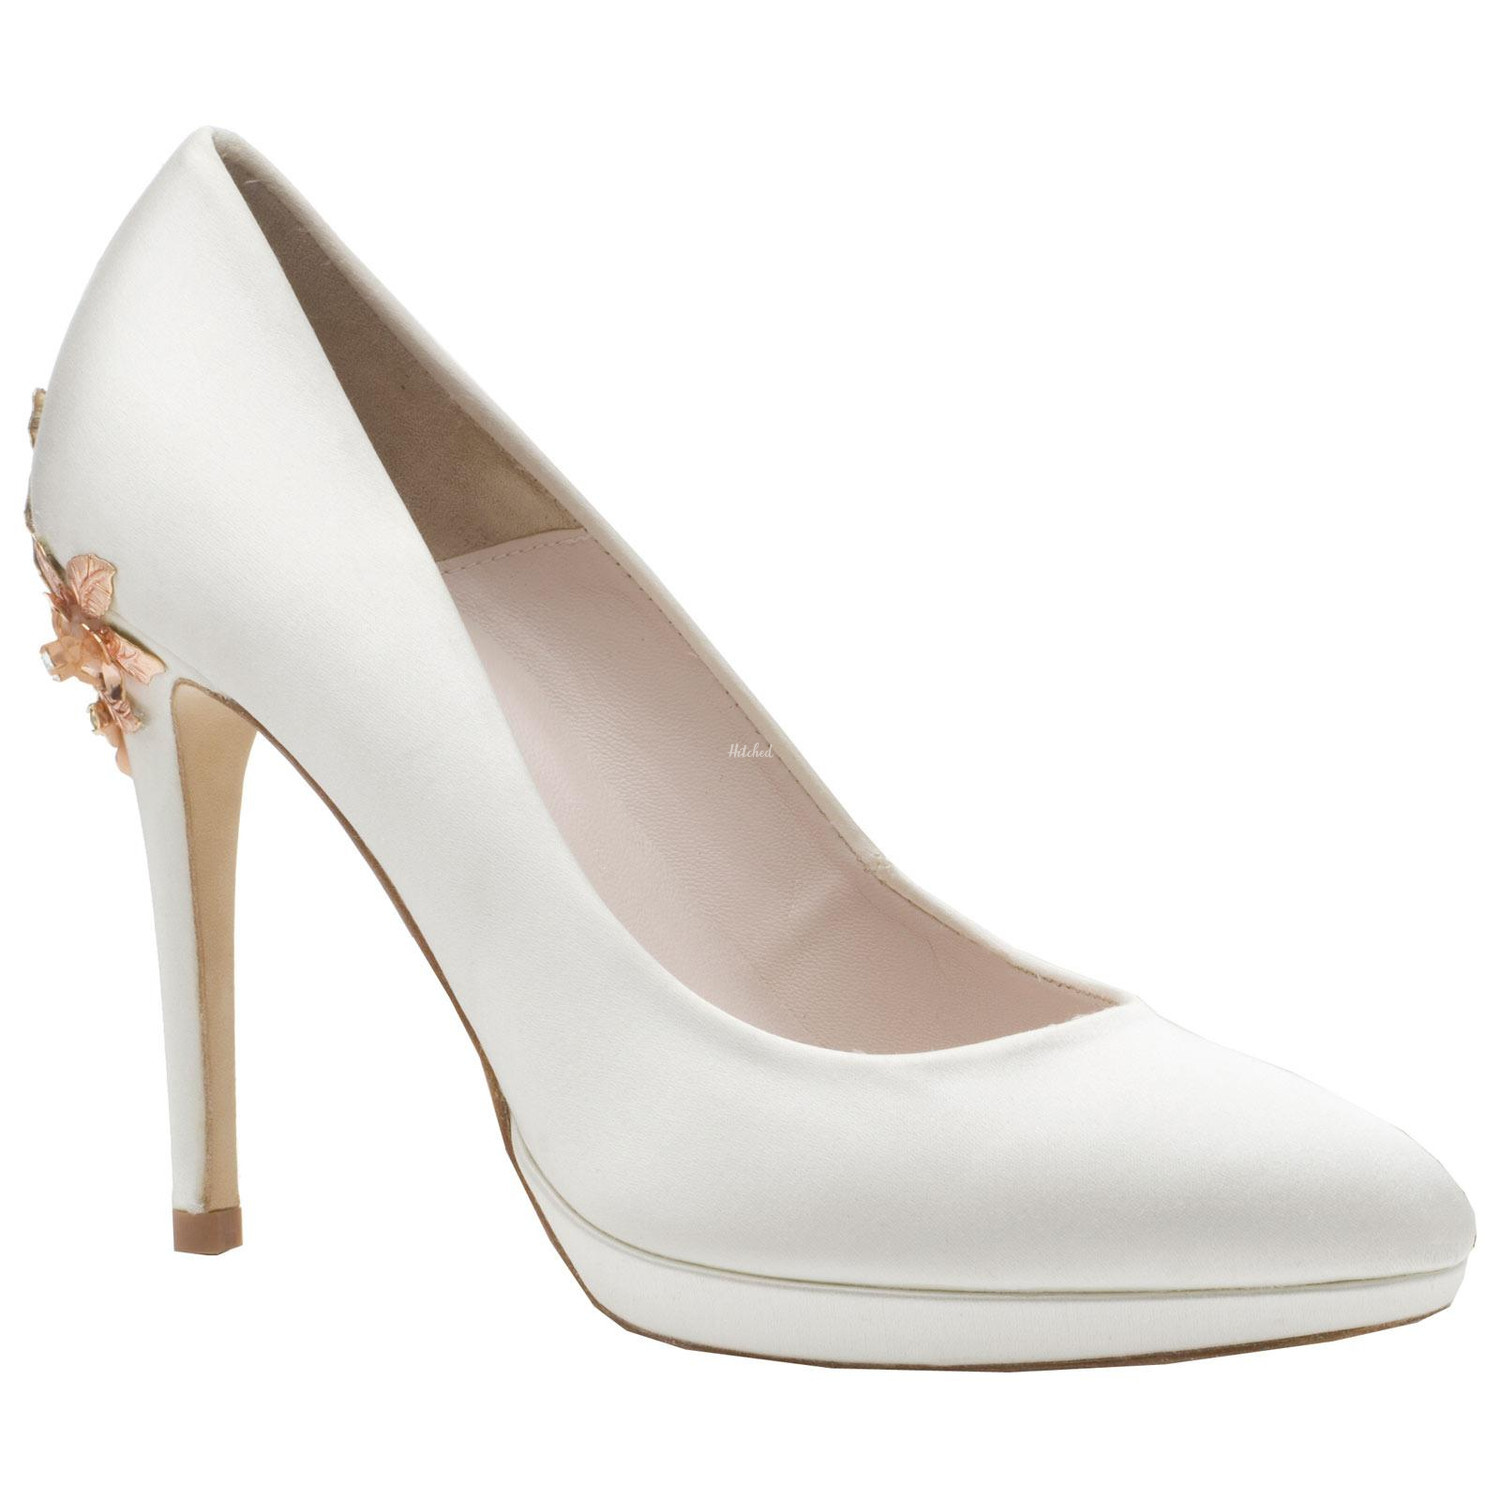 Amy Gold Wedding Shoes from Harriet Wilde - hitched.co.uk